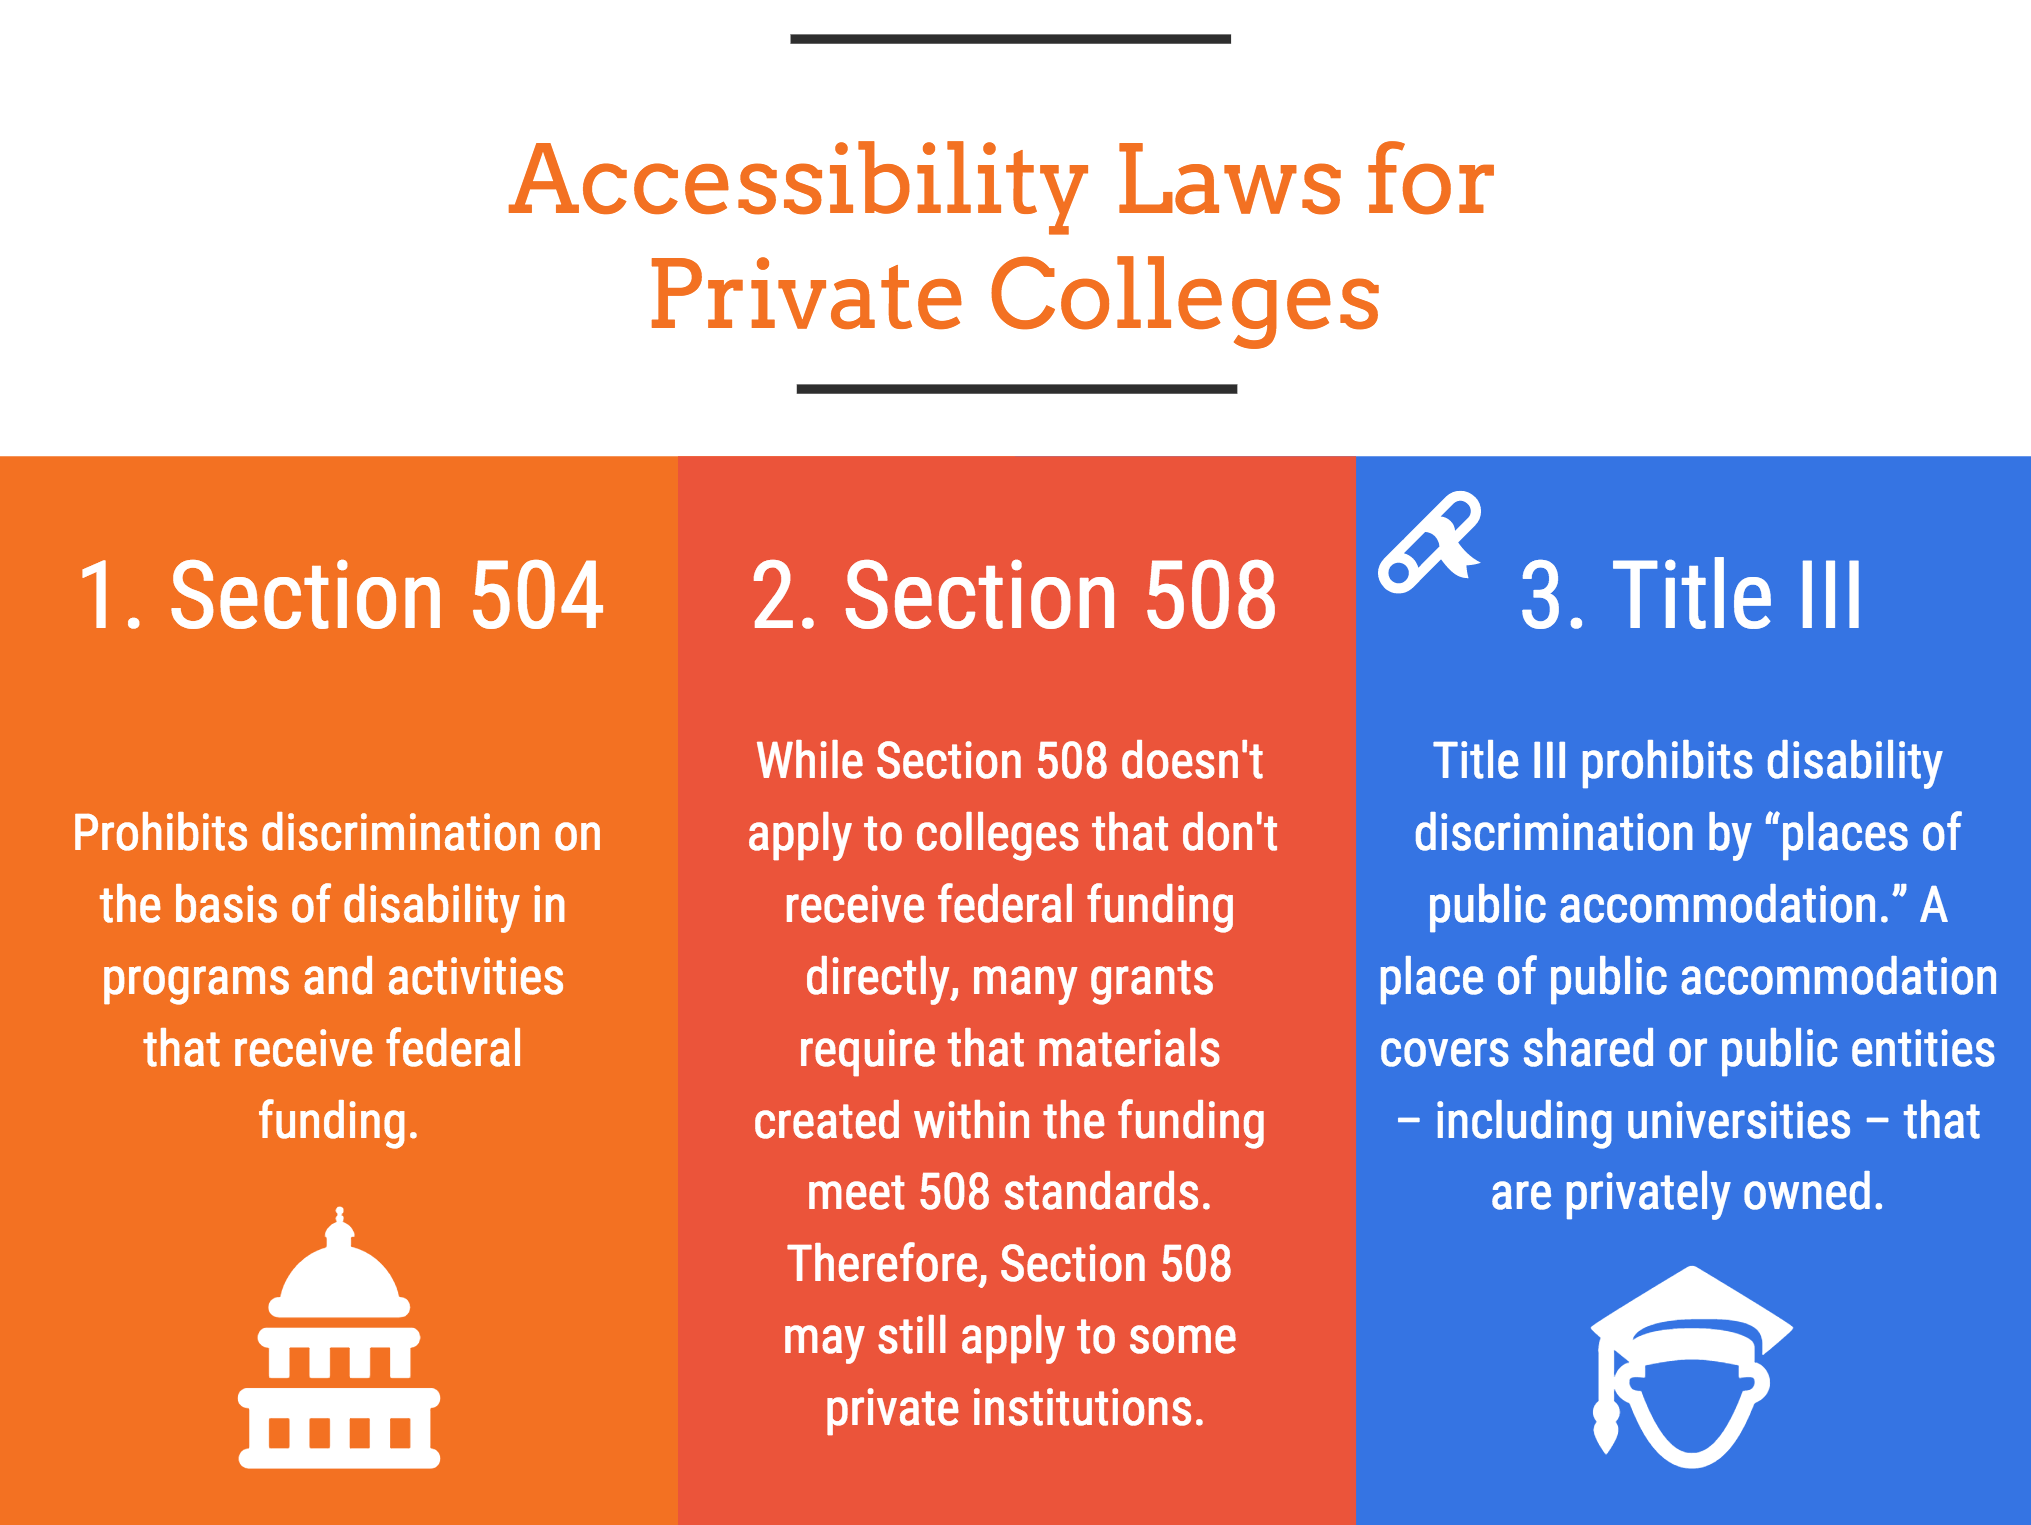 Accessibility Laws for Private Colleges. 1. Section 504 Prohibits discrimination on the basis of disability in programs and activities that receive federal funding. 2. Section 508 While Section 508 doesn't apply to colleges that don't receive federal funding directly, many grants require that materials created within the funding meet 508 standards. Therefore, Section 508 may still apply to some private institutions. 3. Title III Title III prohibits disability discrimination by “places of public accommodation.” A place of public accommodation covers shared or public entities – including universities – that are privately owned.